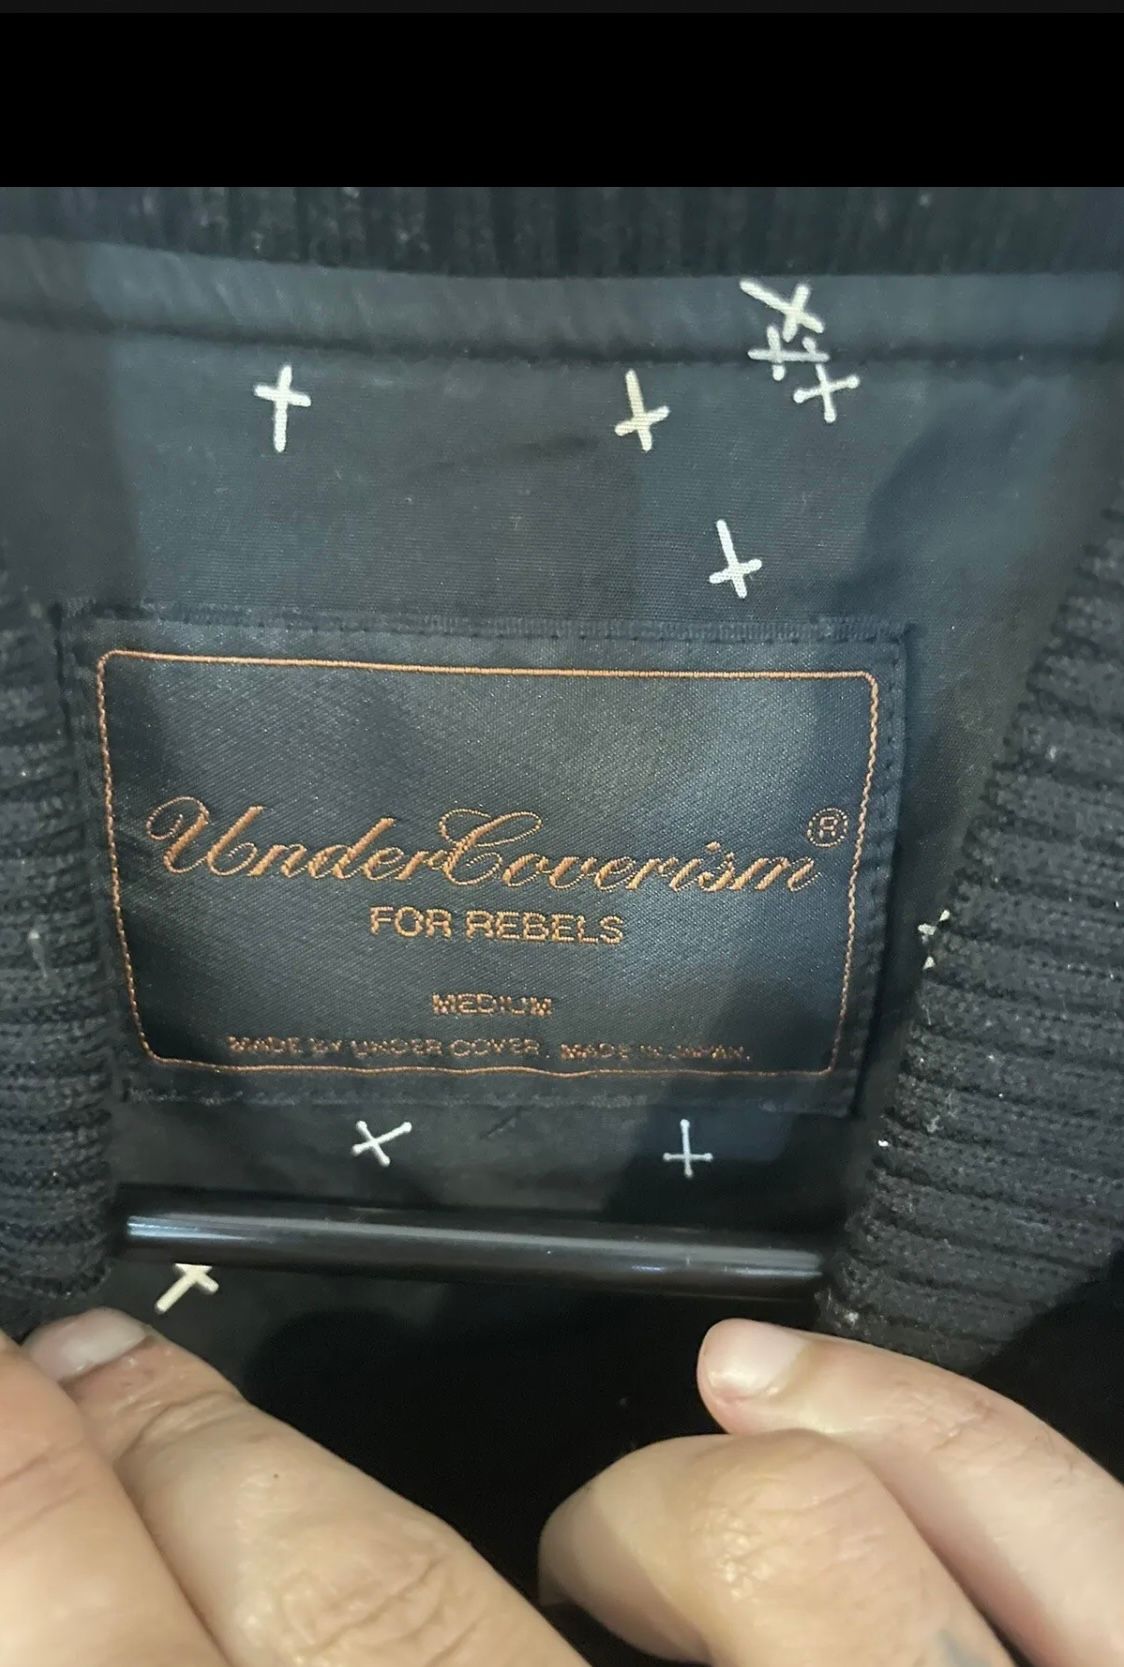 Undercover undercover rebelgods jacket Size US M / EU 48-50 / 2 - 7 Preview